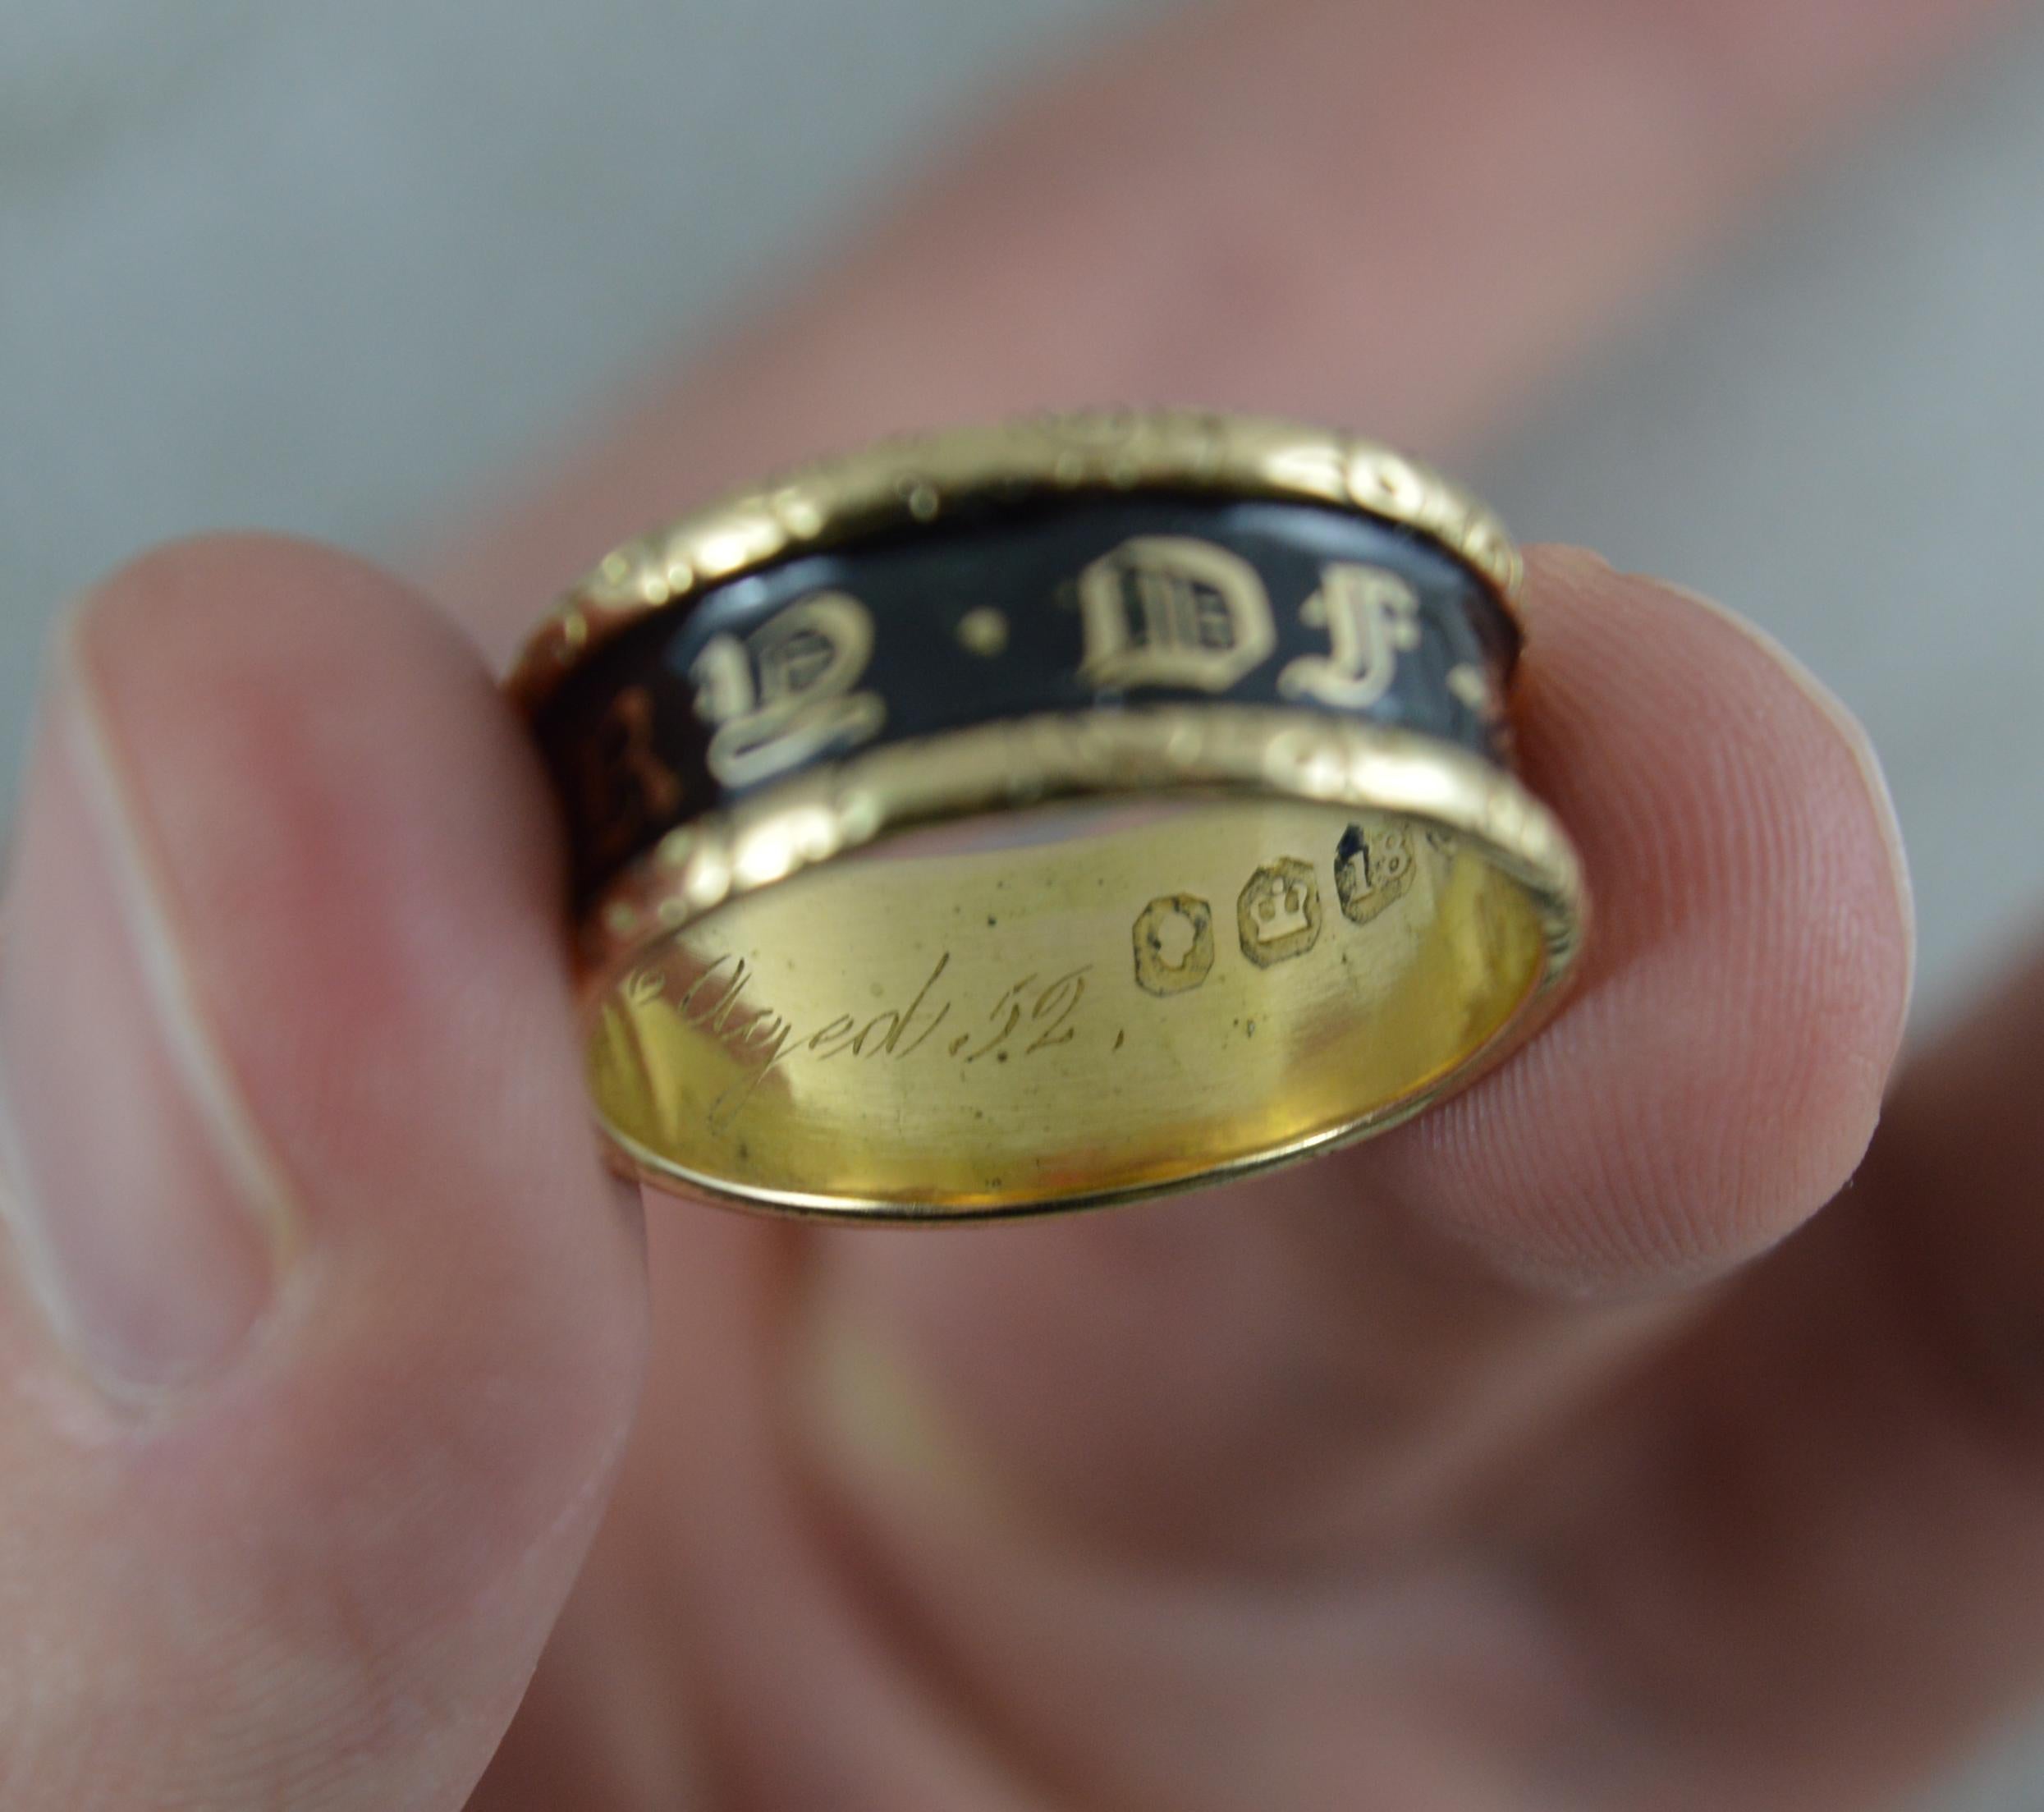 1824 William IV 18 Carat Gold and Enamel in Memory of Mourning Band Ring 2